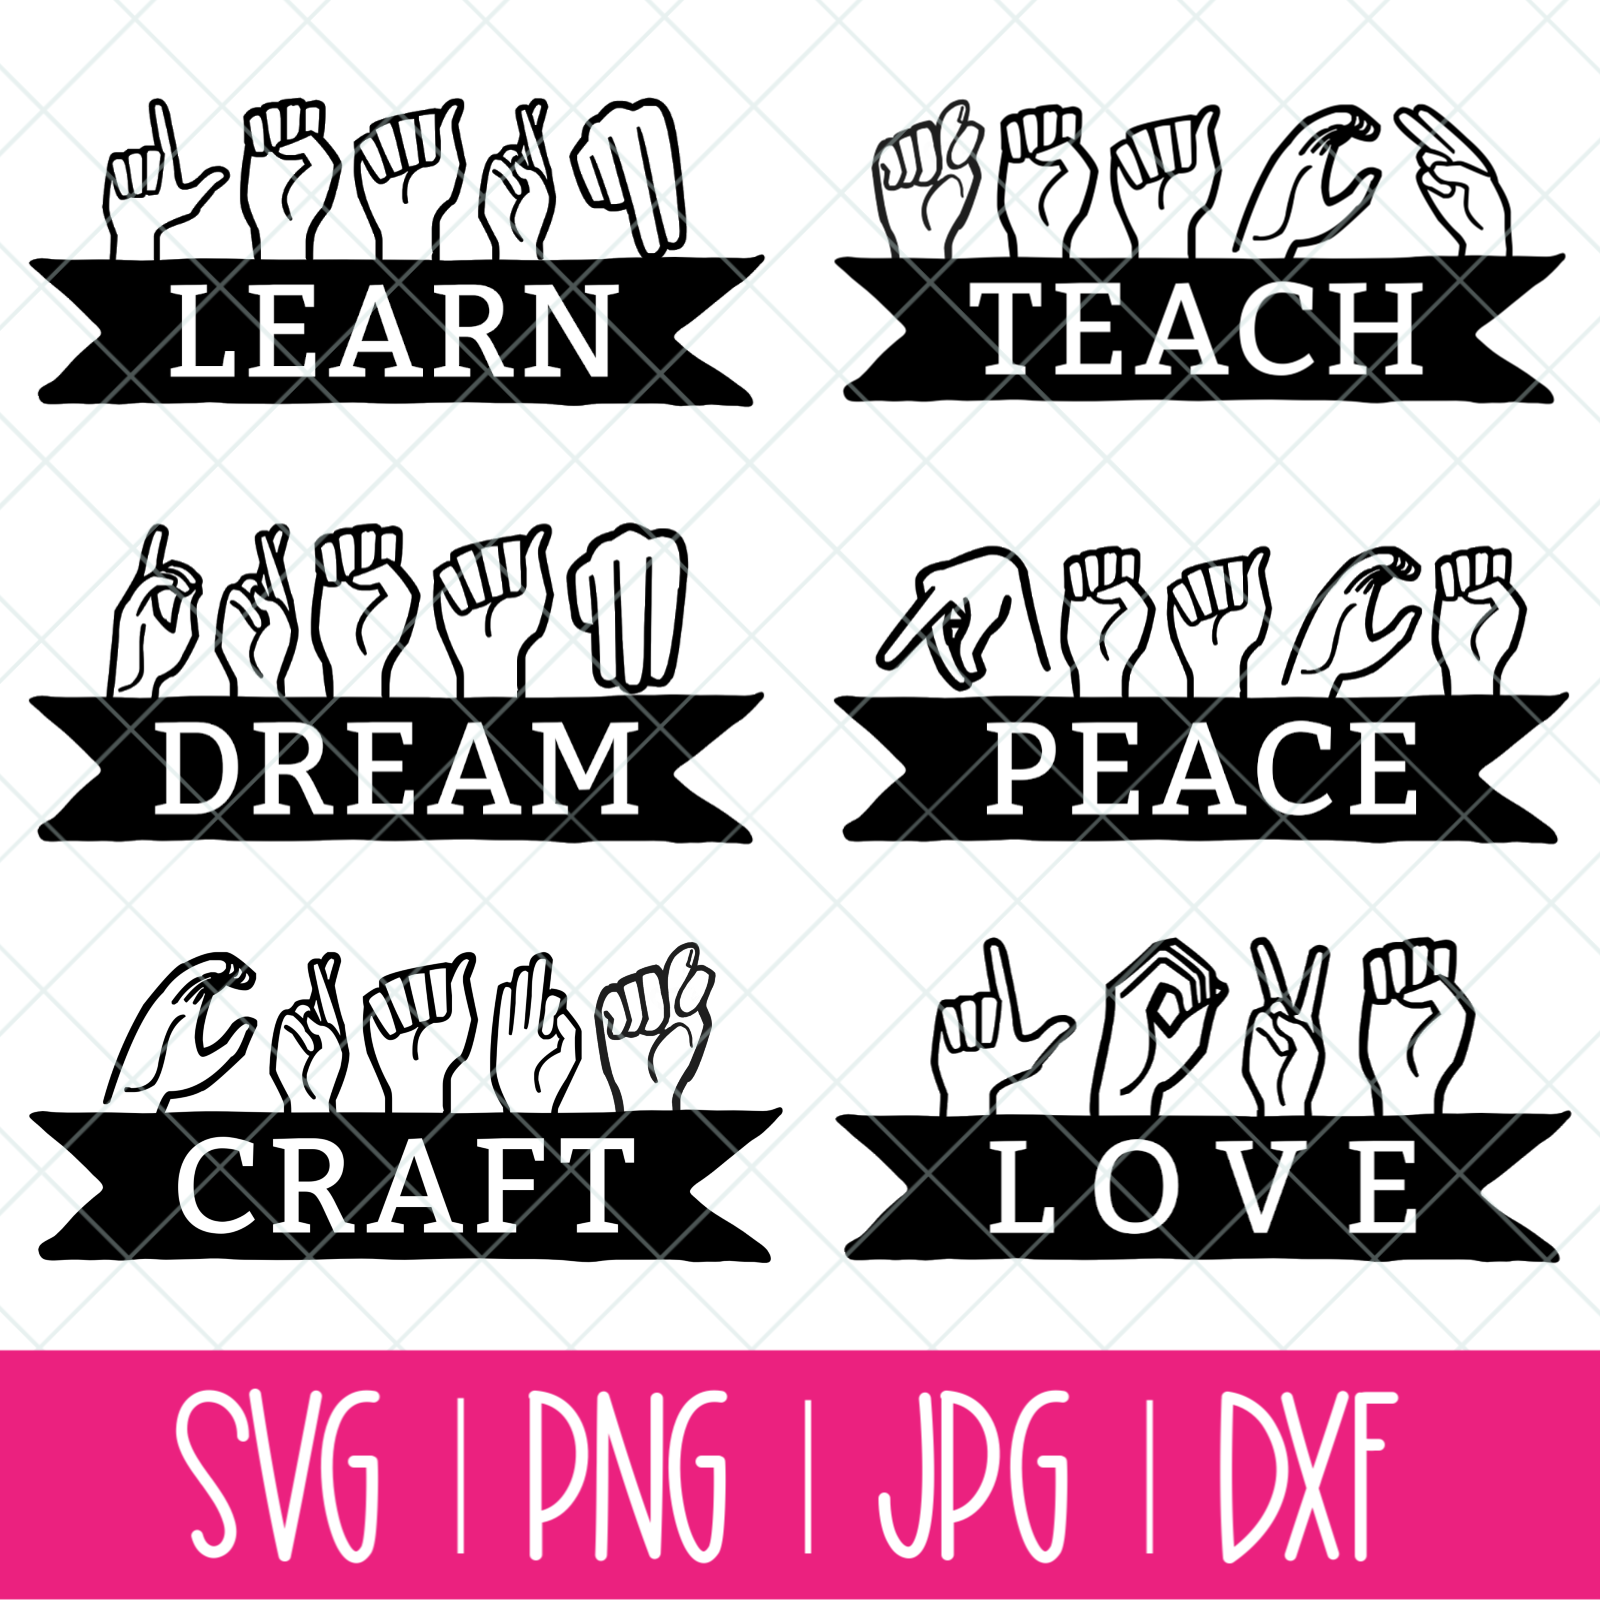 6 Inspiring Asl Words Svg Includes Love Dream Teach Learn Craft And Peace